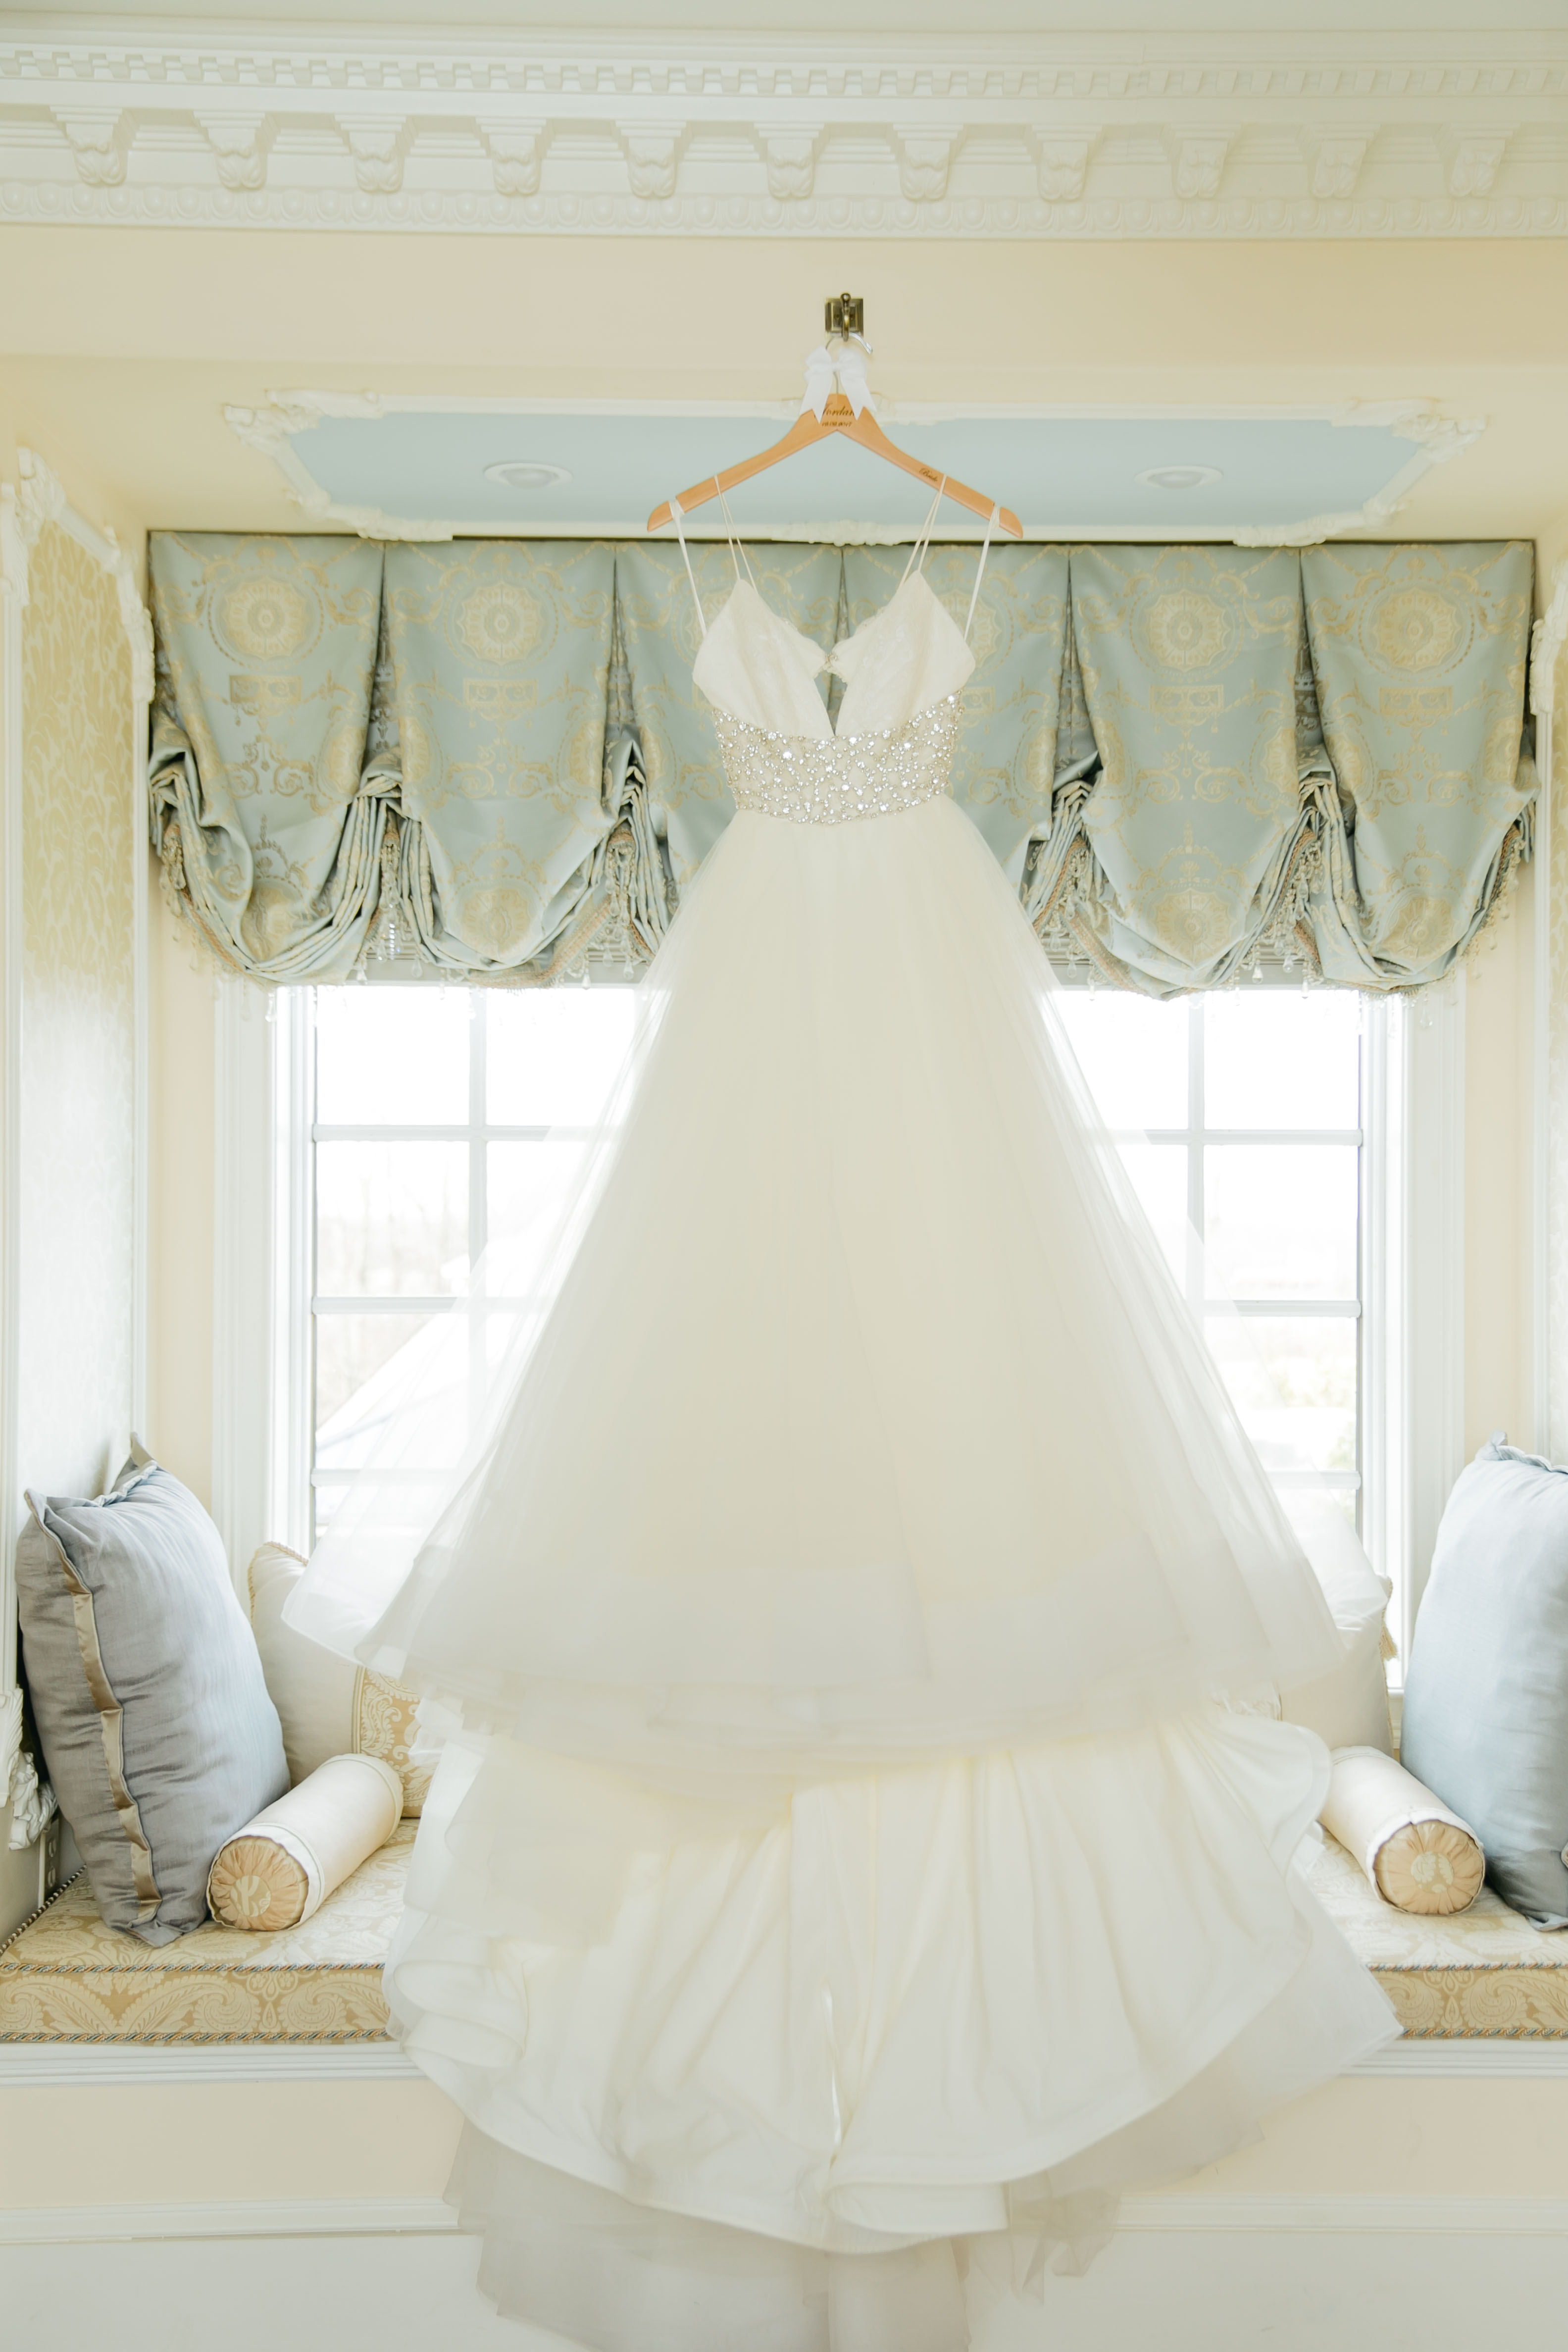 Wedding gown trends for 2018 perfect for every bride's style. Learn about the hottest new designers and what unique options there are for newly engaged brides!